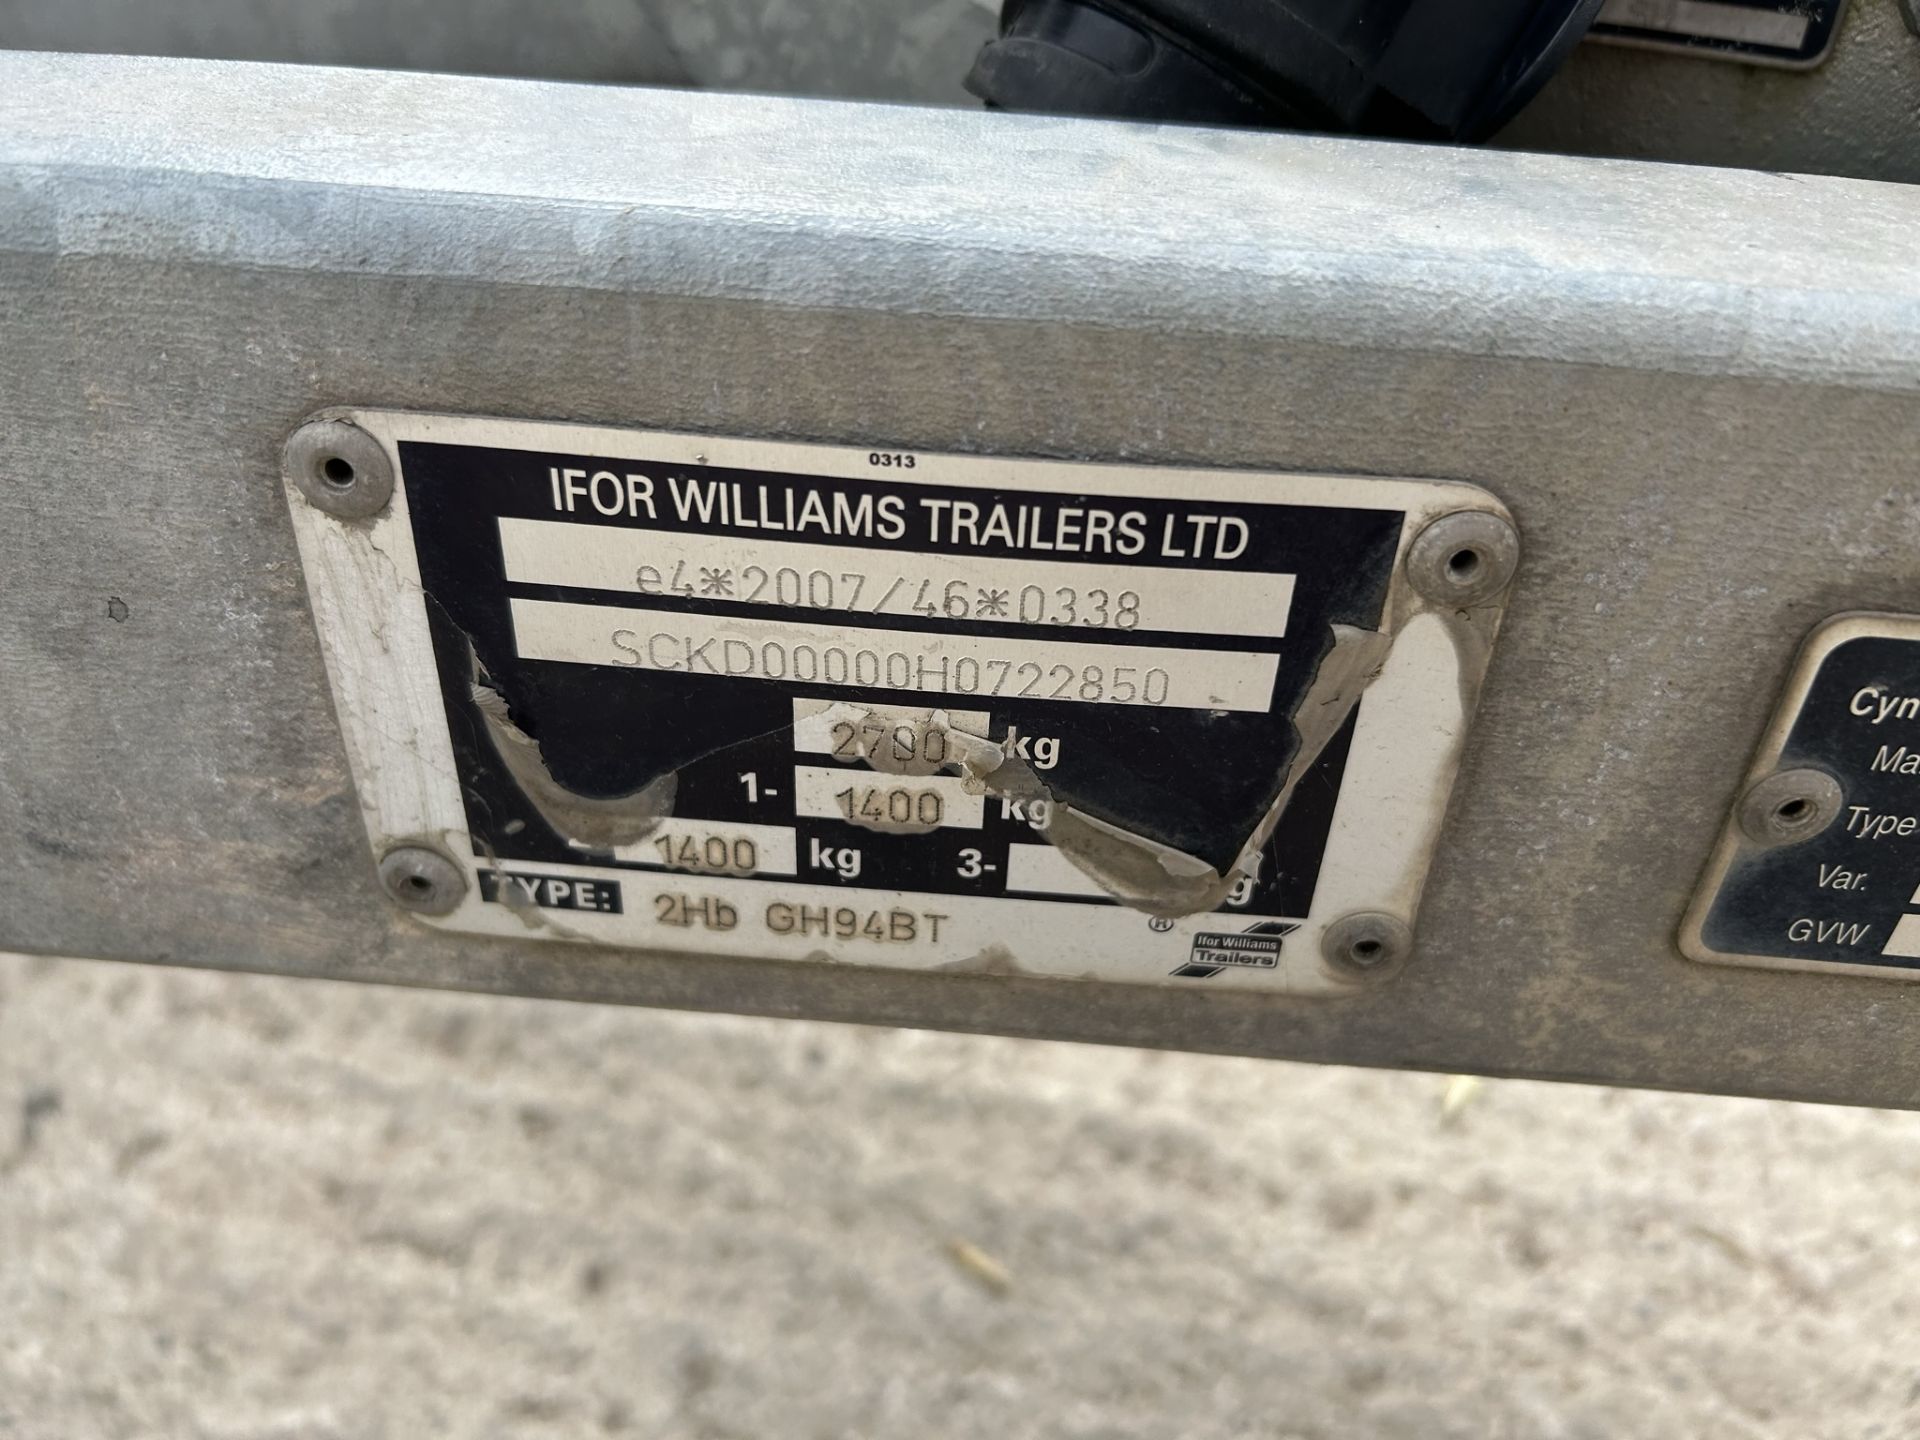 Used Ifor Williams GH94BT - Image 3 of 6